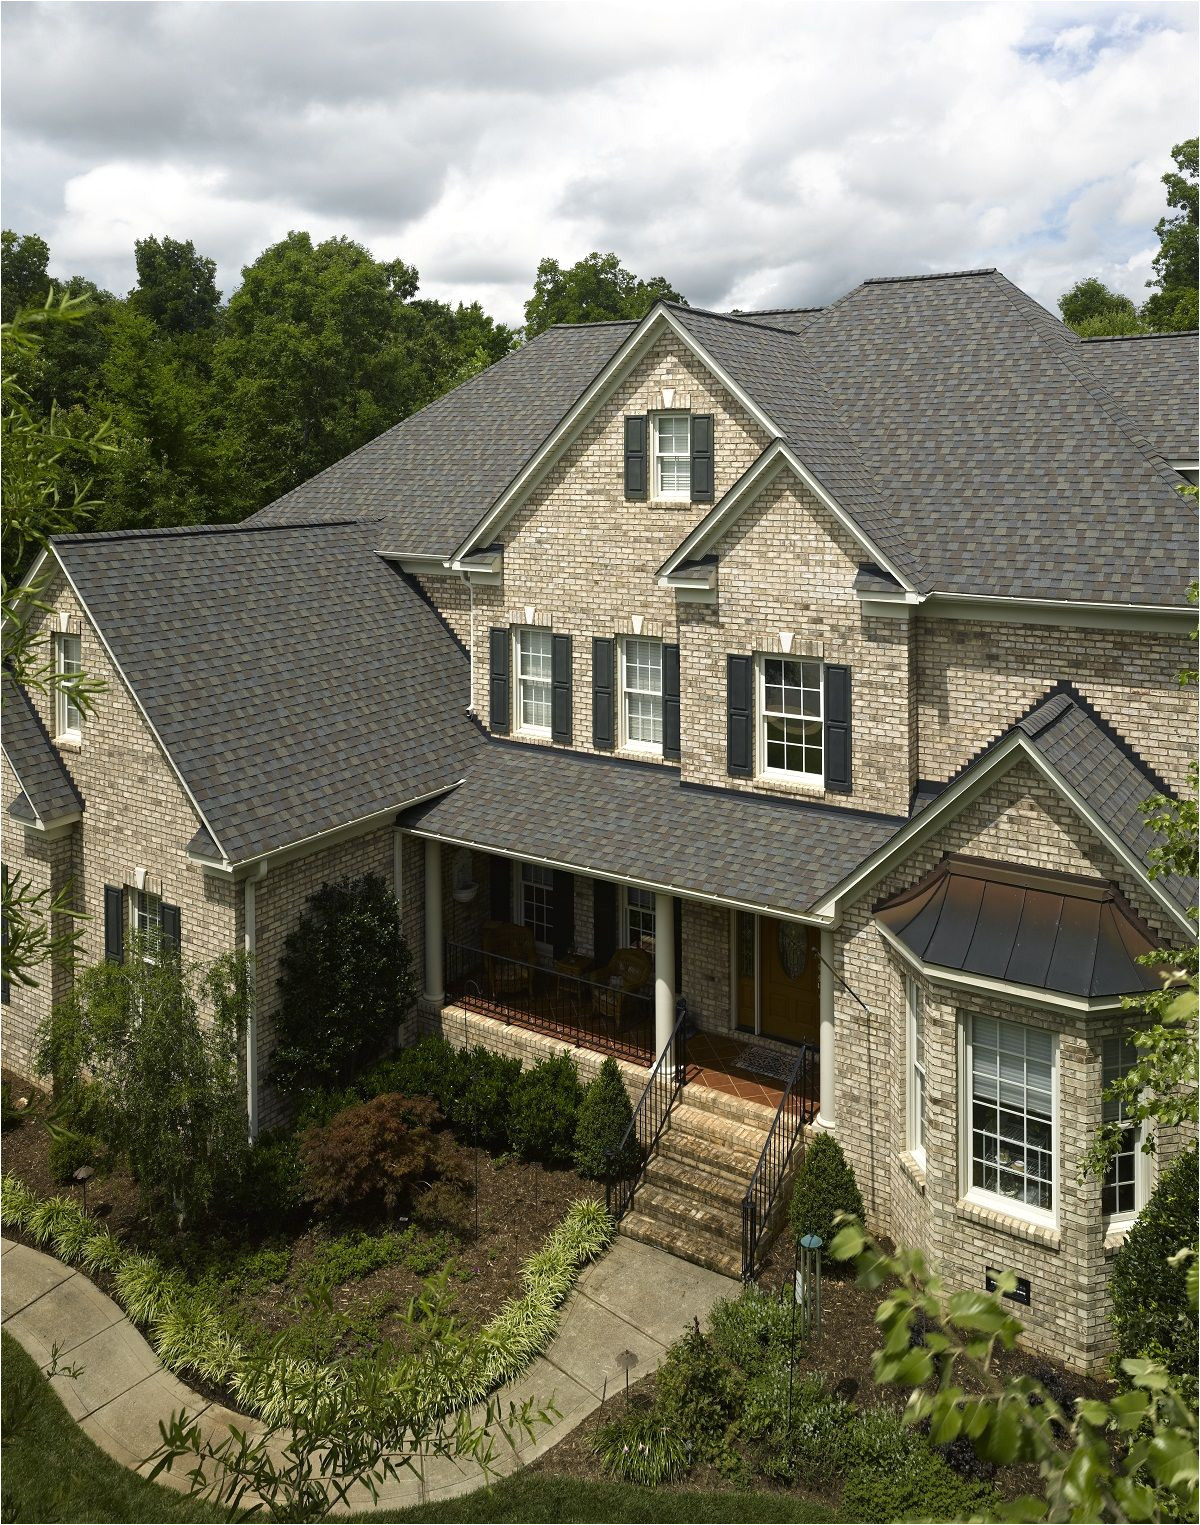 Certainteed Landmark Colonial Slate Pictures Roofing Photo Gallery Certainteed Design Center Grand Manor